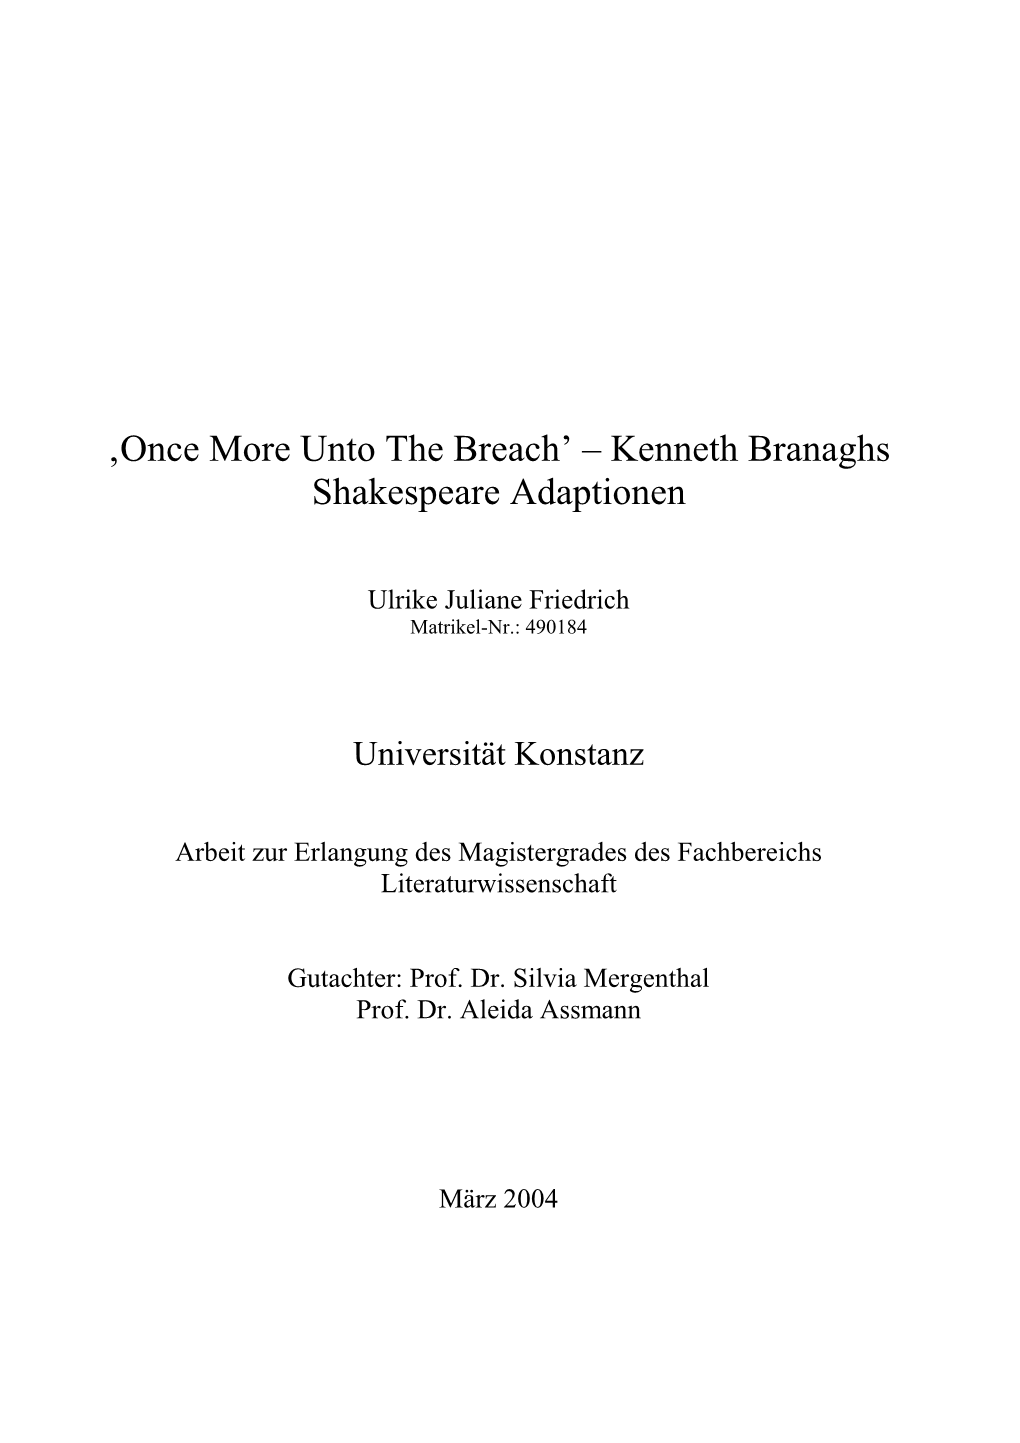 ‚Once More Unto the Breach' – Kenneth Branaghs Shakespeare